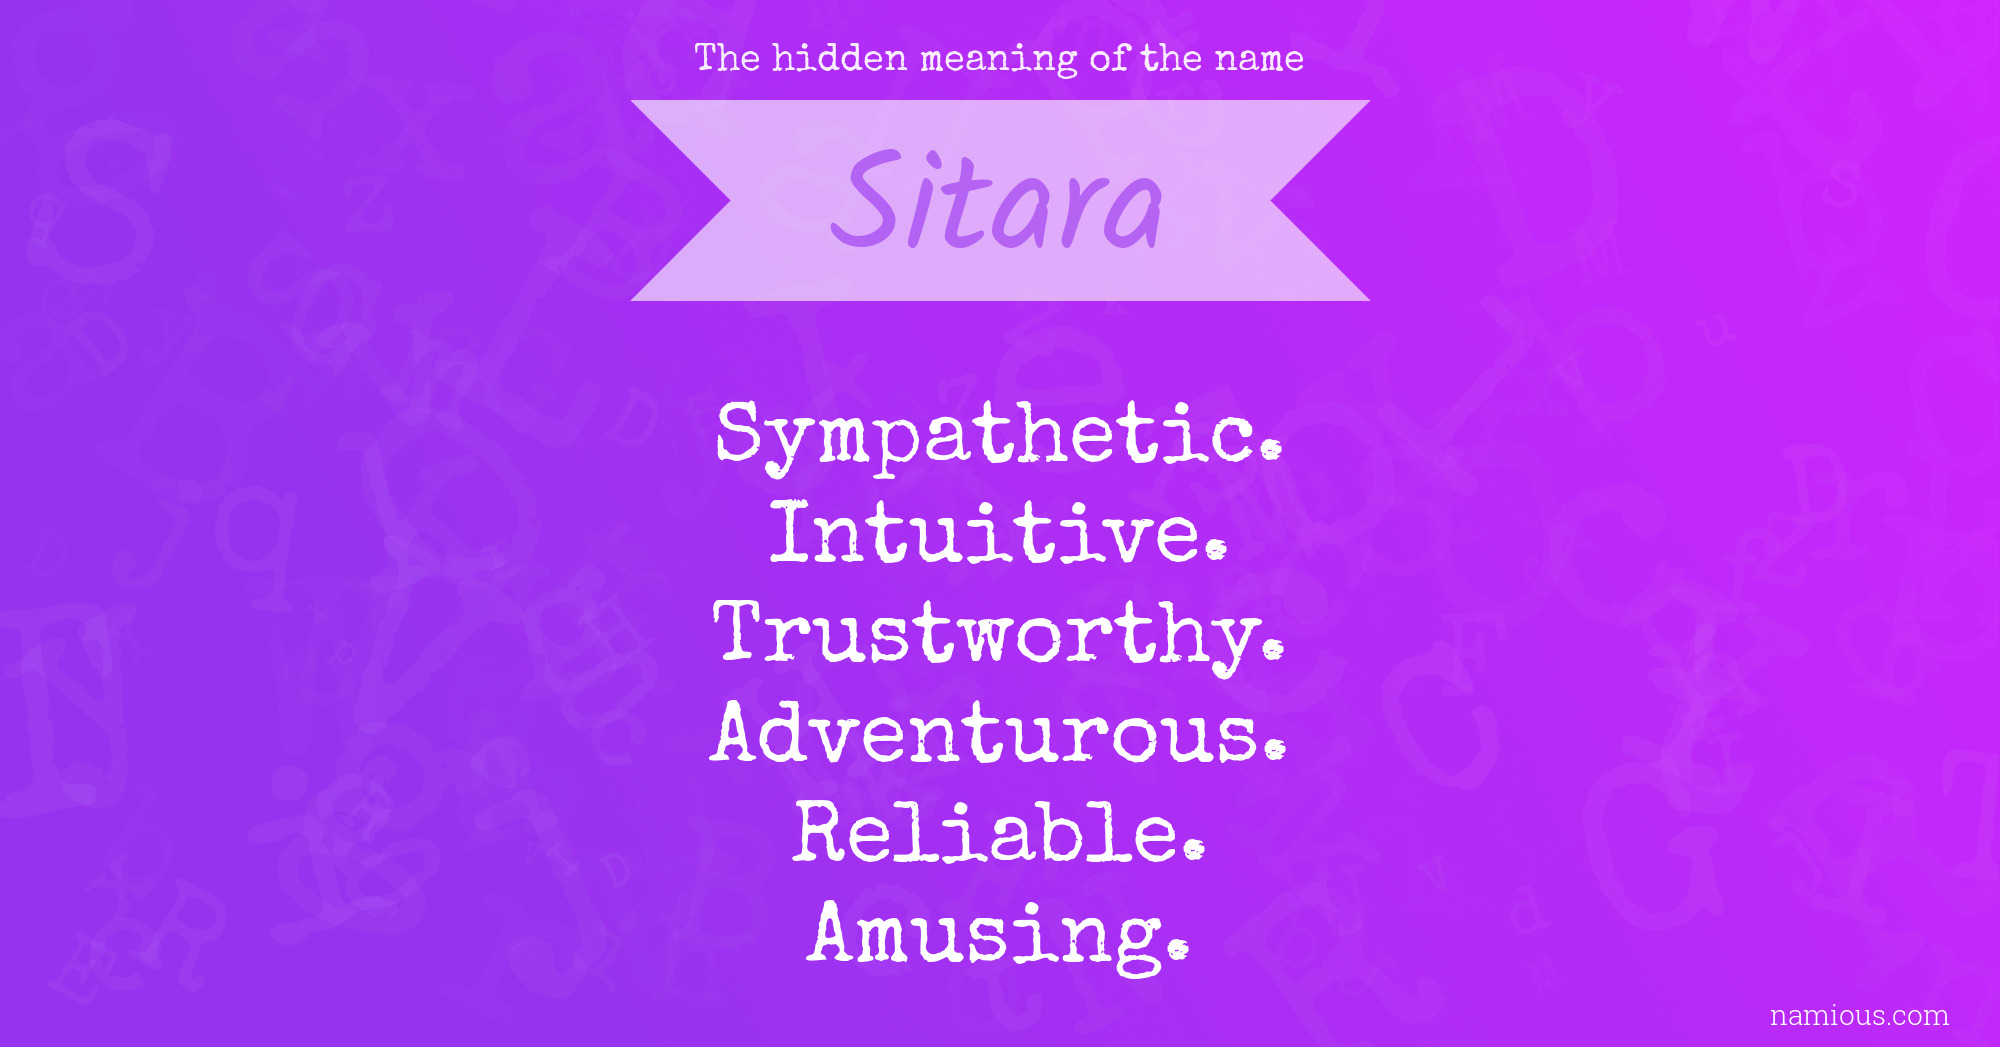 The hidden meaning of the name Sitara